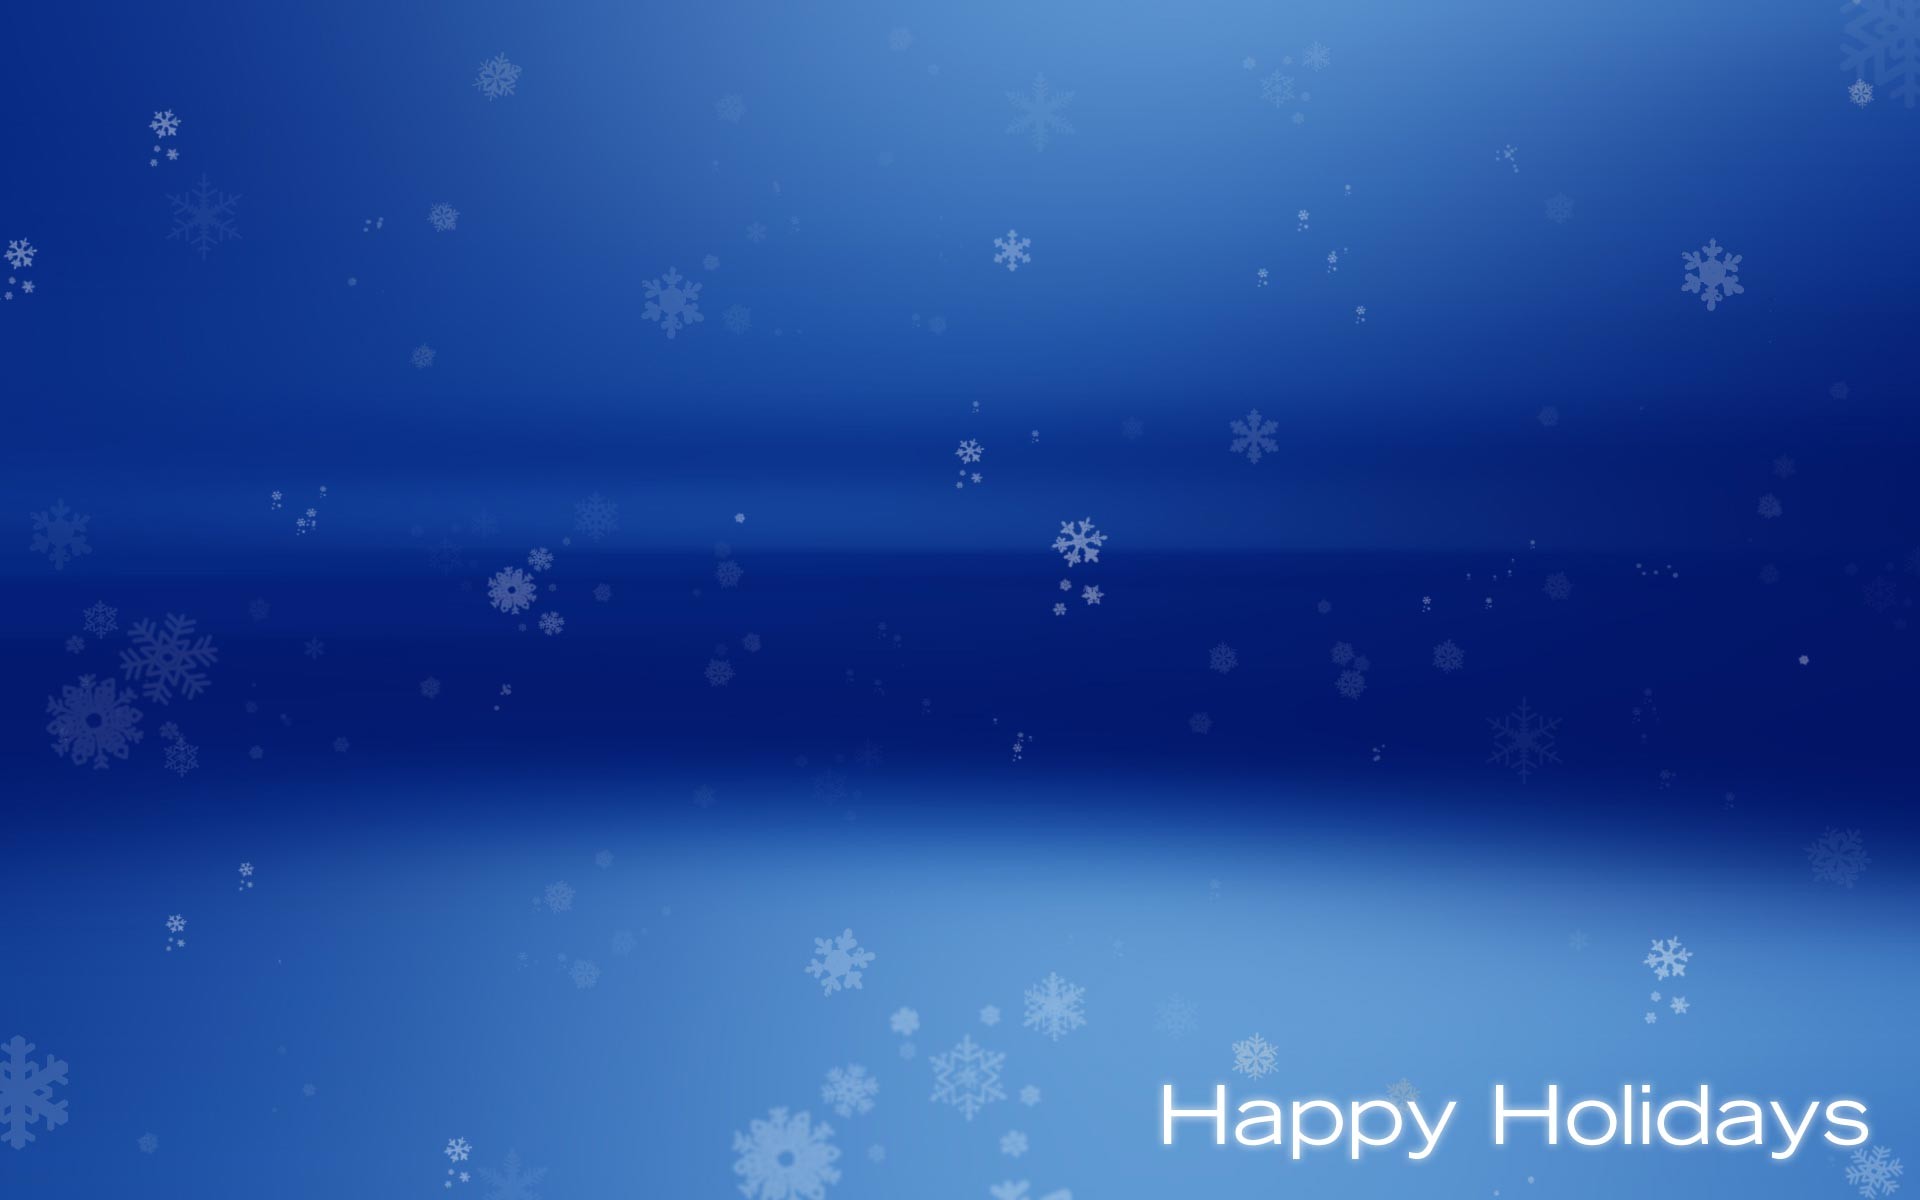 1920x1200 Happy holiday hd wallpaper backgrounds.